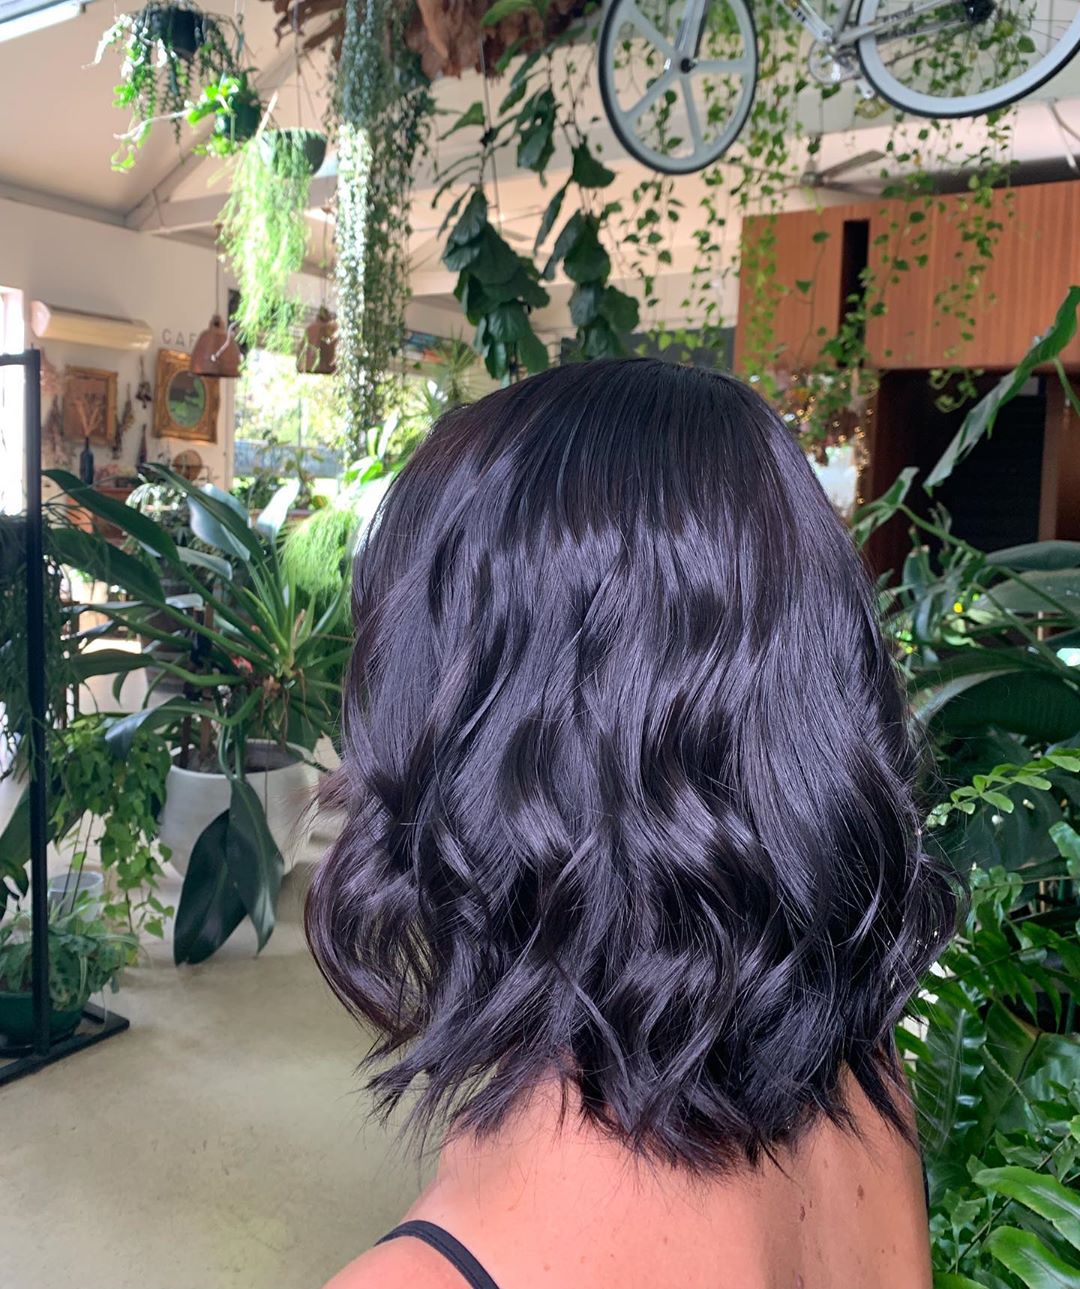 20 Short Hair Color Ideas For A Change Up In 2020